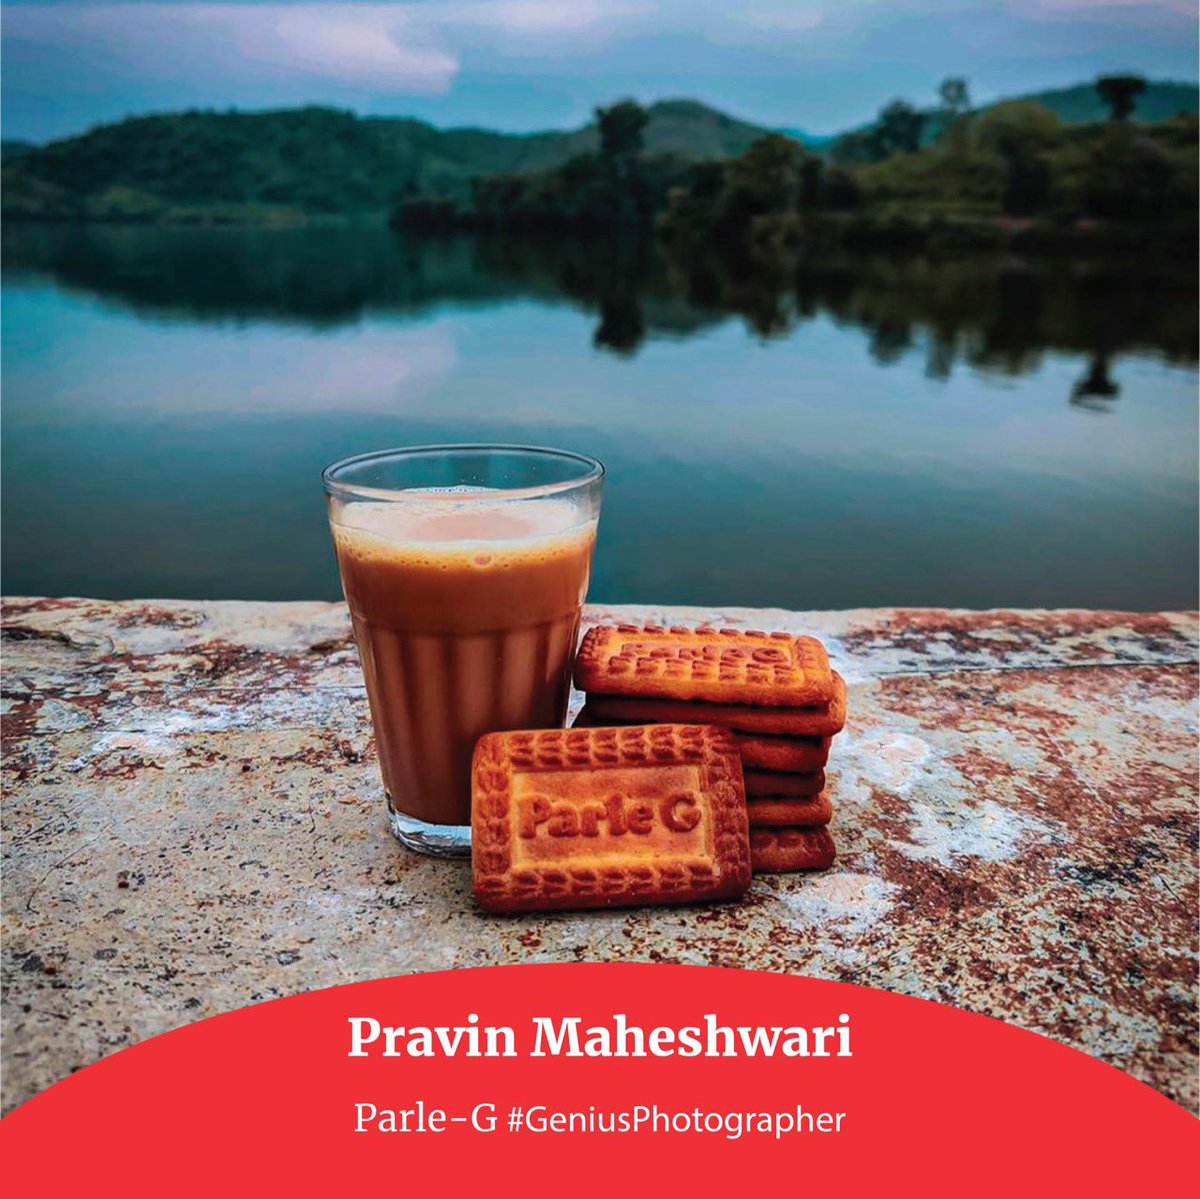 Pravin Maheshwari captured going on a morning hike and enjoying the sunrise with Parle-G and Chai perfectly with this shot. Are you a #GeniusPhotographer? Participate now and win sweet surprises!
#ParleG #Repost #Genius #Photographer #AfternoonTea #Biscuits #AfternoonSnacks #Chai